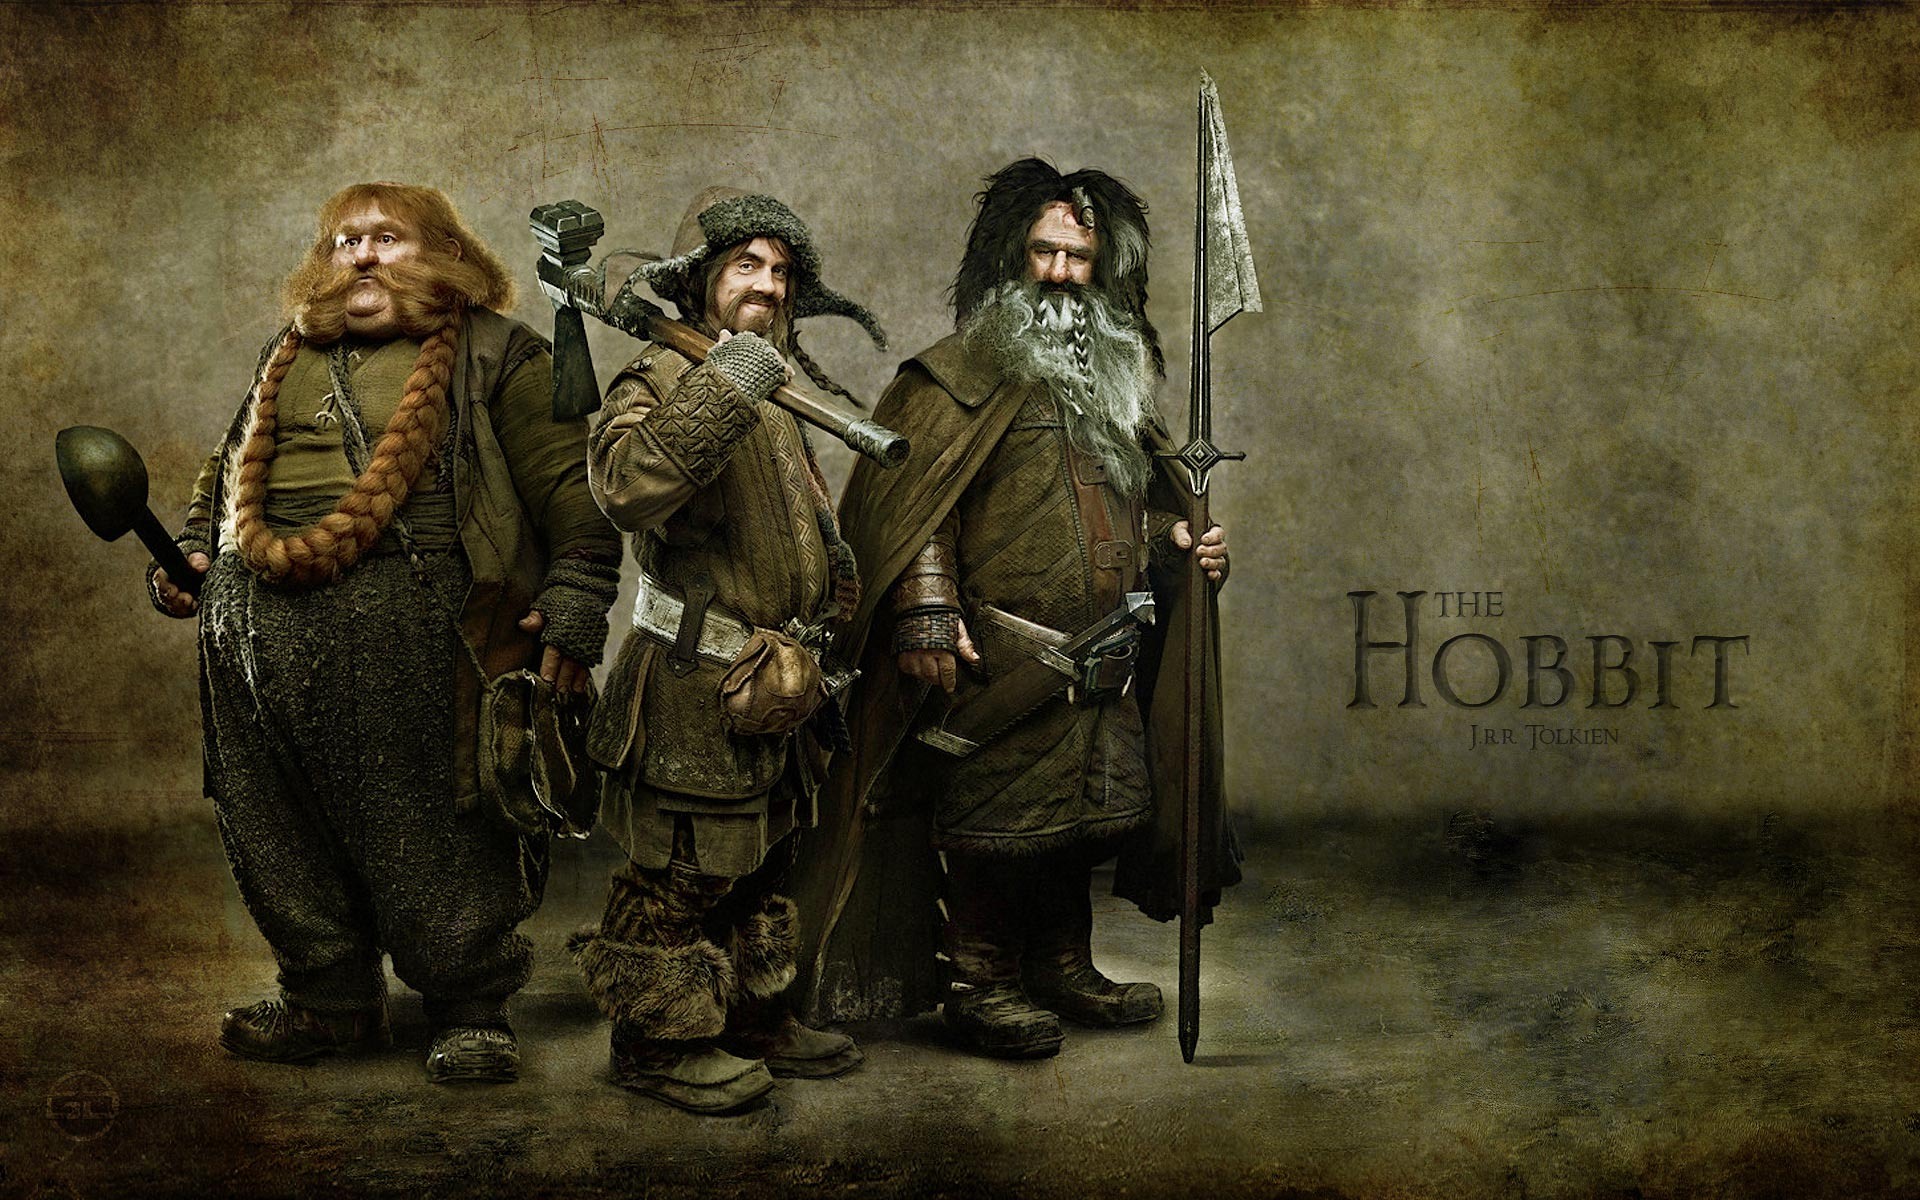 The Hobbit: An Unexpected Journey HD wallpapers #5 - 1920x1200